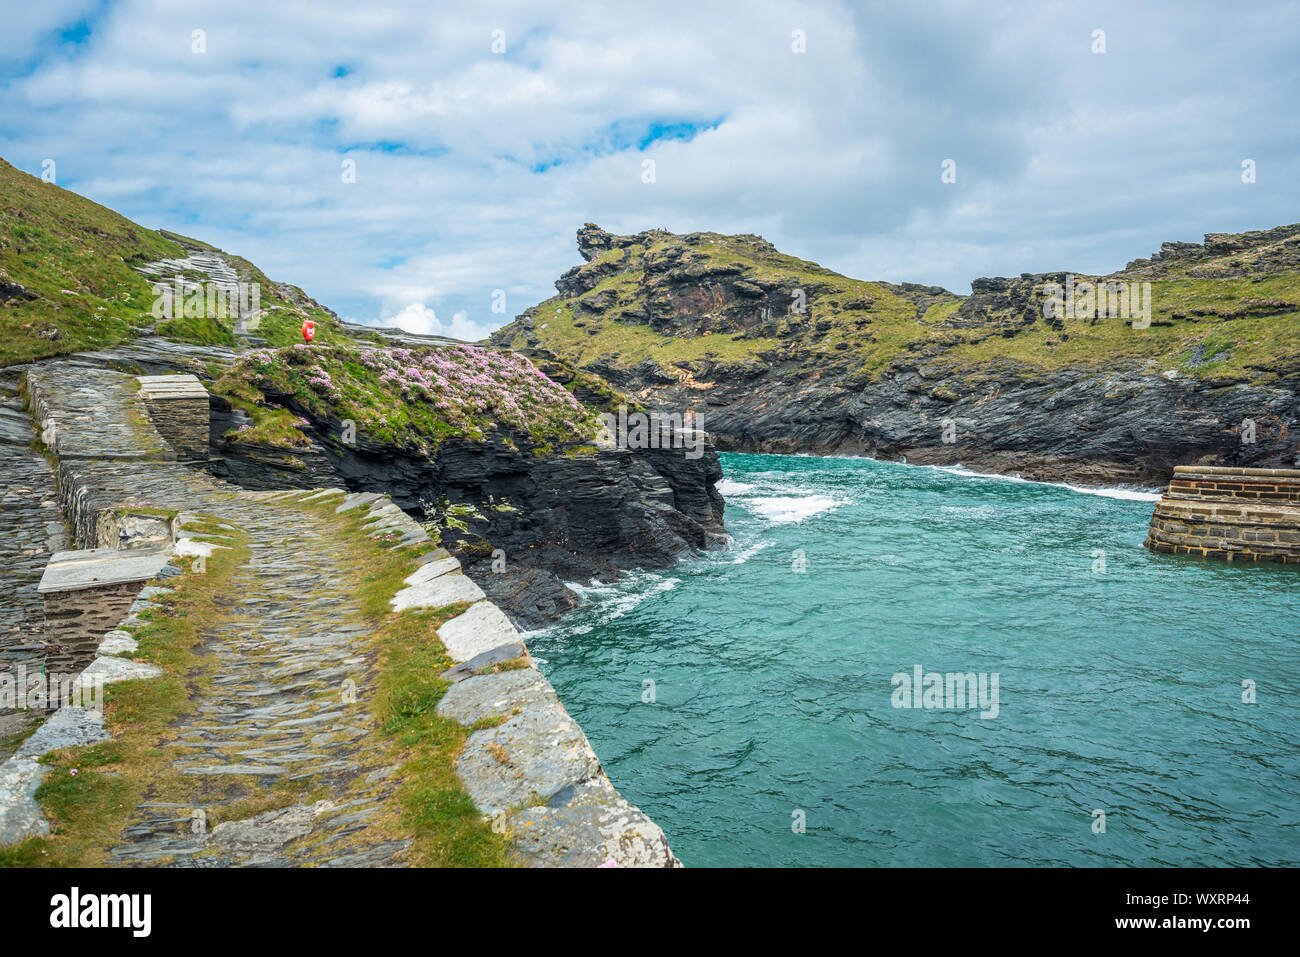 Boscastle Harbour entrance with protective sea walls, North Cornwall, England, UK. Stock Photo